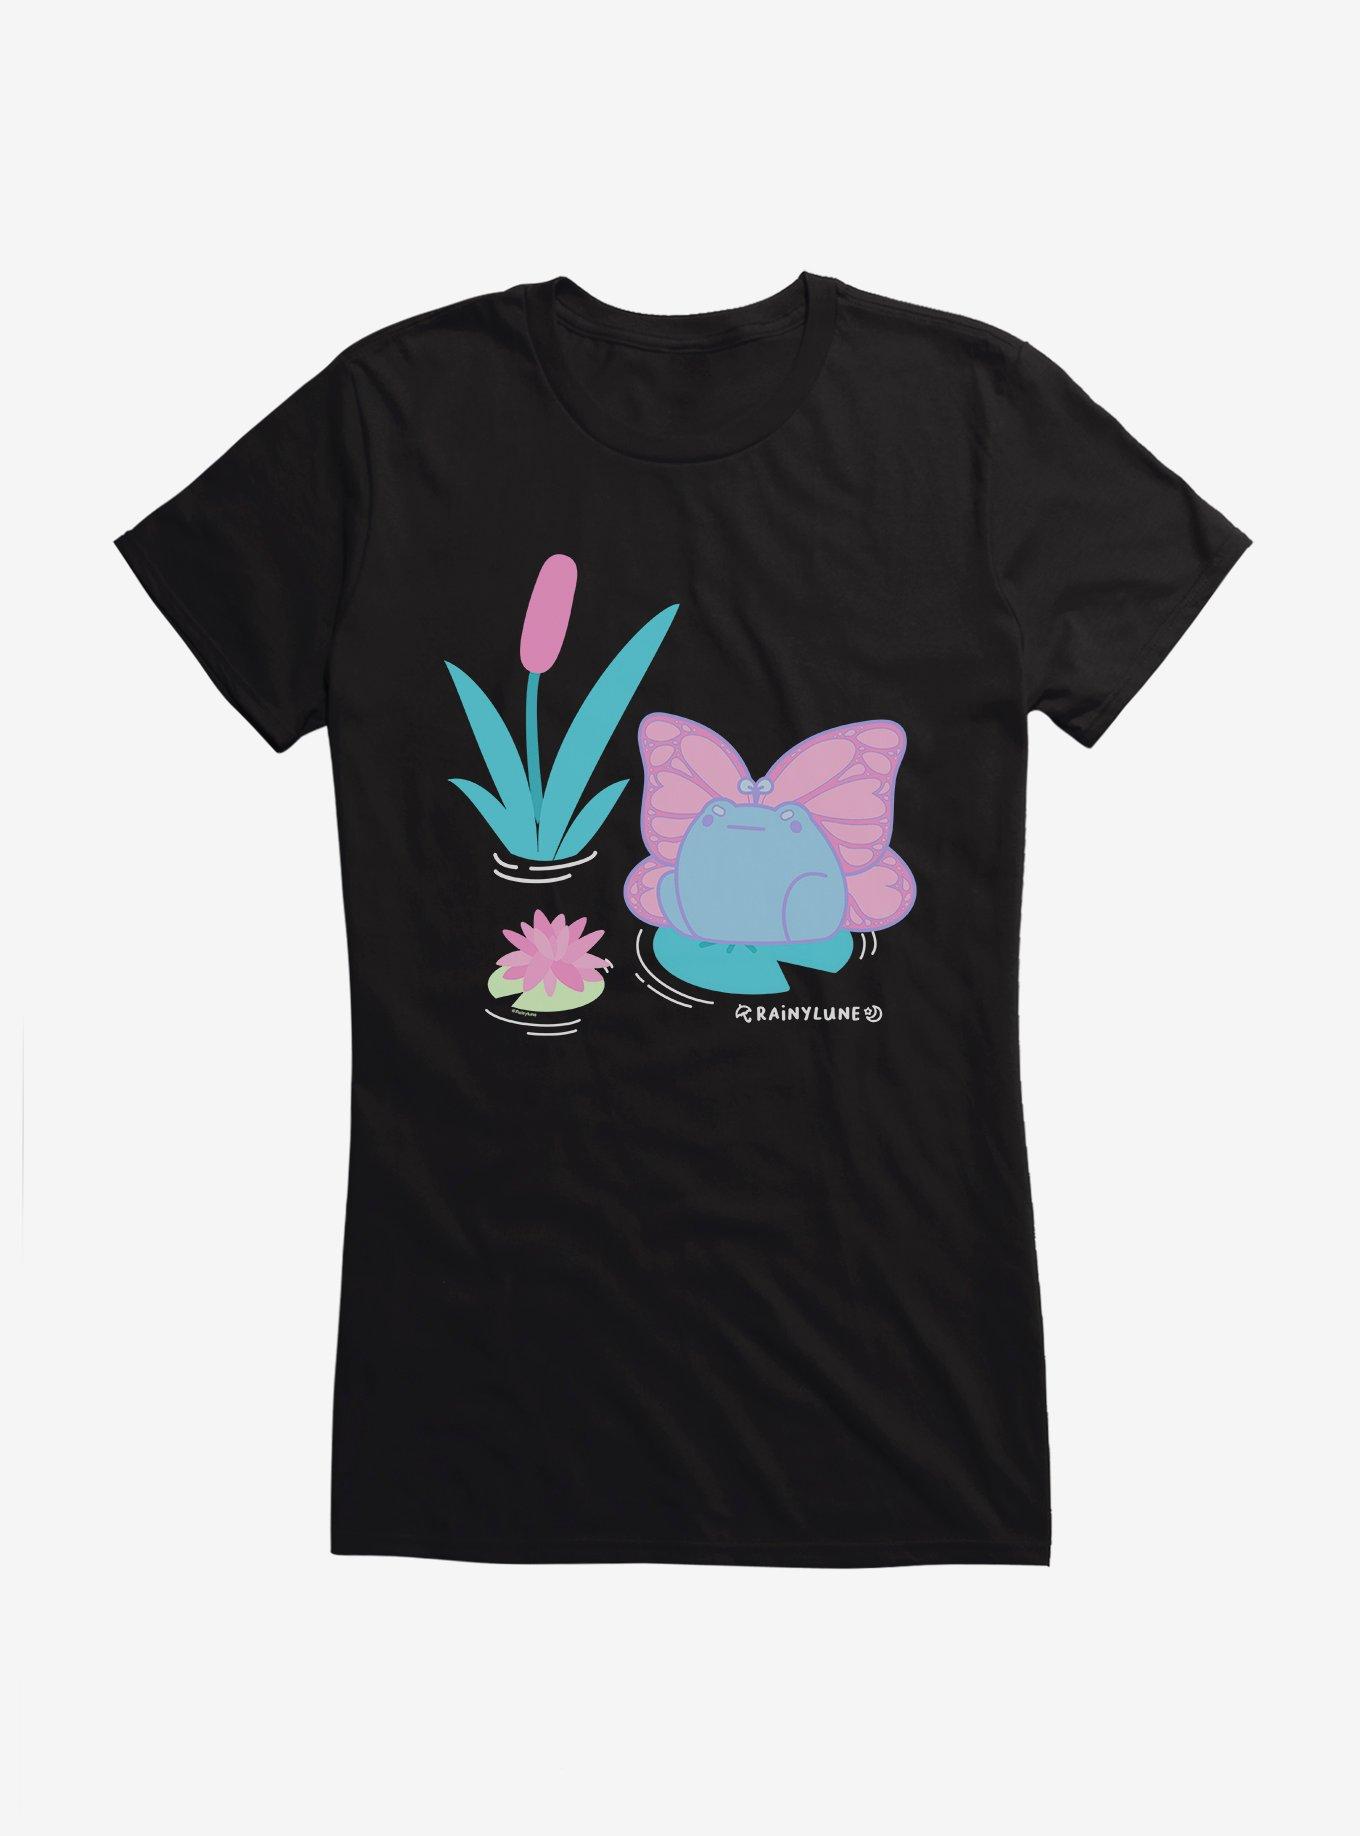 Rainylune Sprout The Frog Butterfly Girls T-Shirt